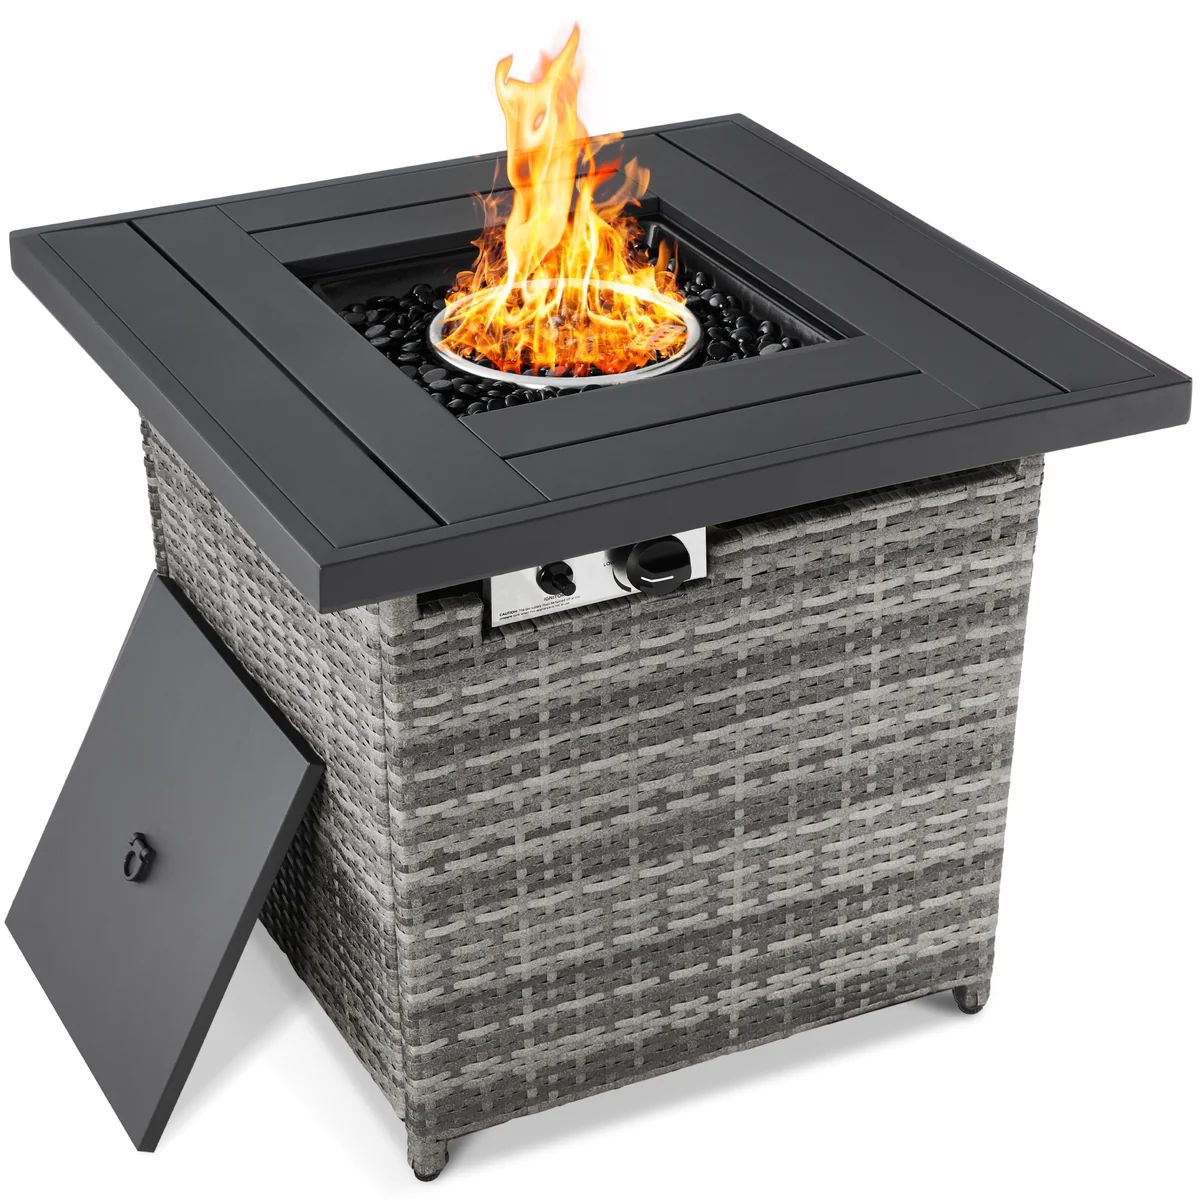 28in Fire Pit Table 50,000 BTU Wicker Propane w/ Faux Wood Tabletop, Cover | Best Choice Products 